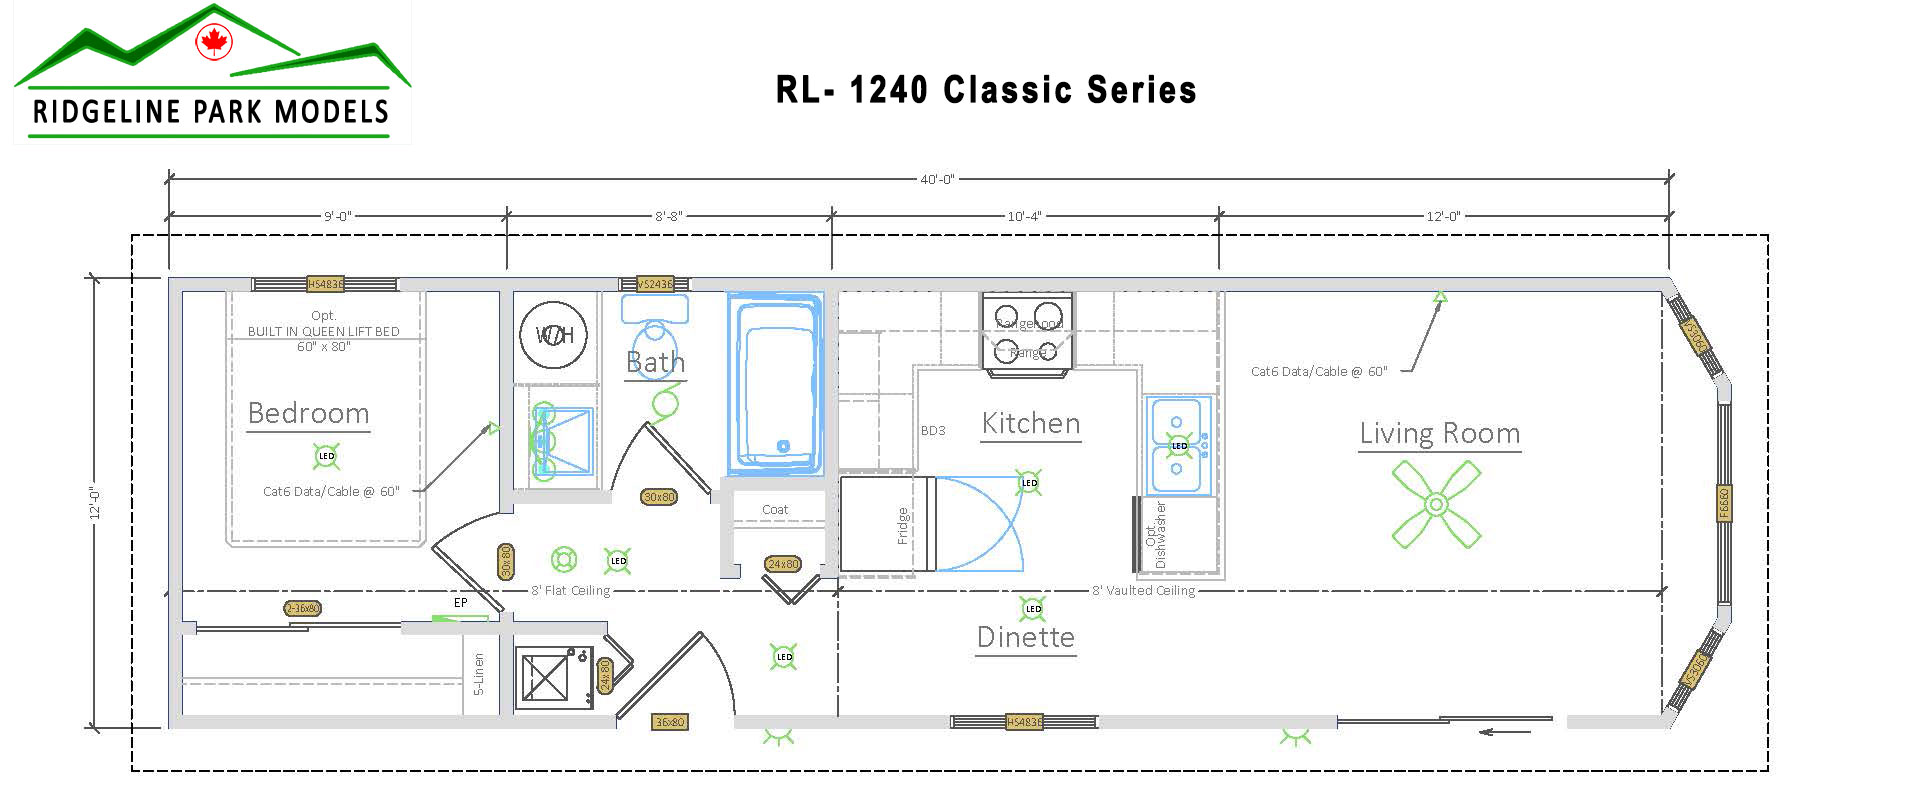 Plan RL-1238 from Ridgeline Park Models serving the Okanagan Valley and all British Columbia locations.